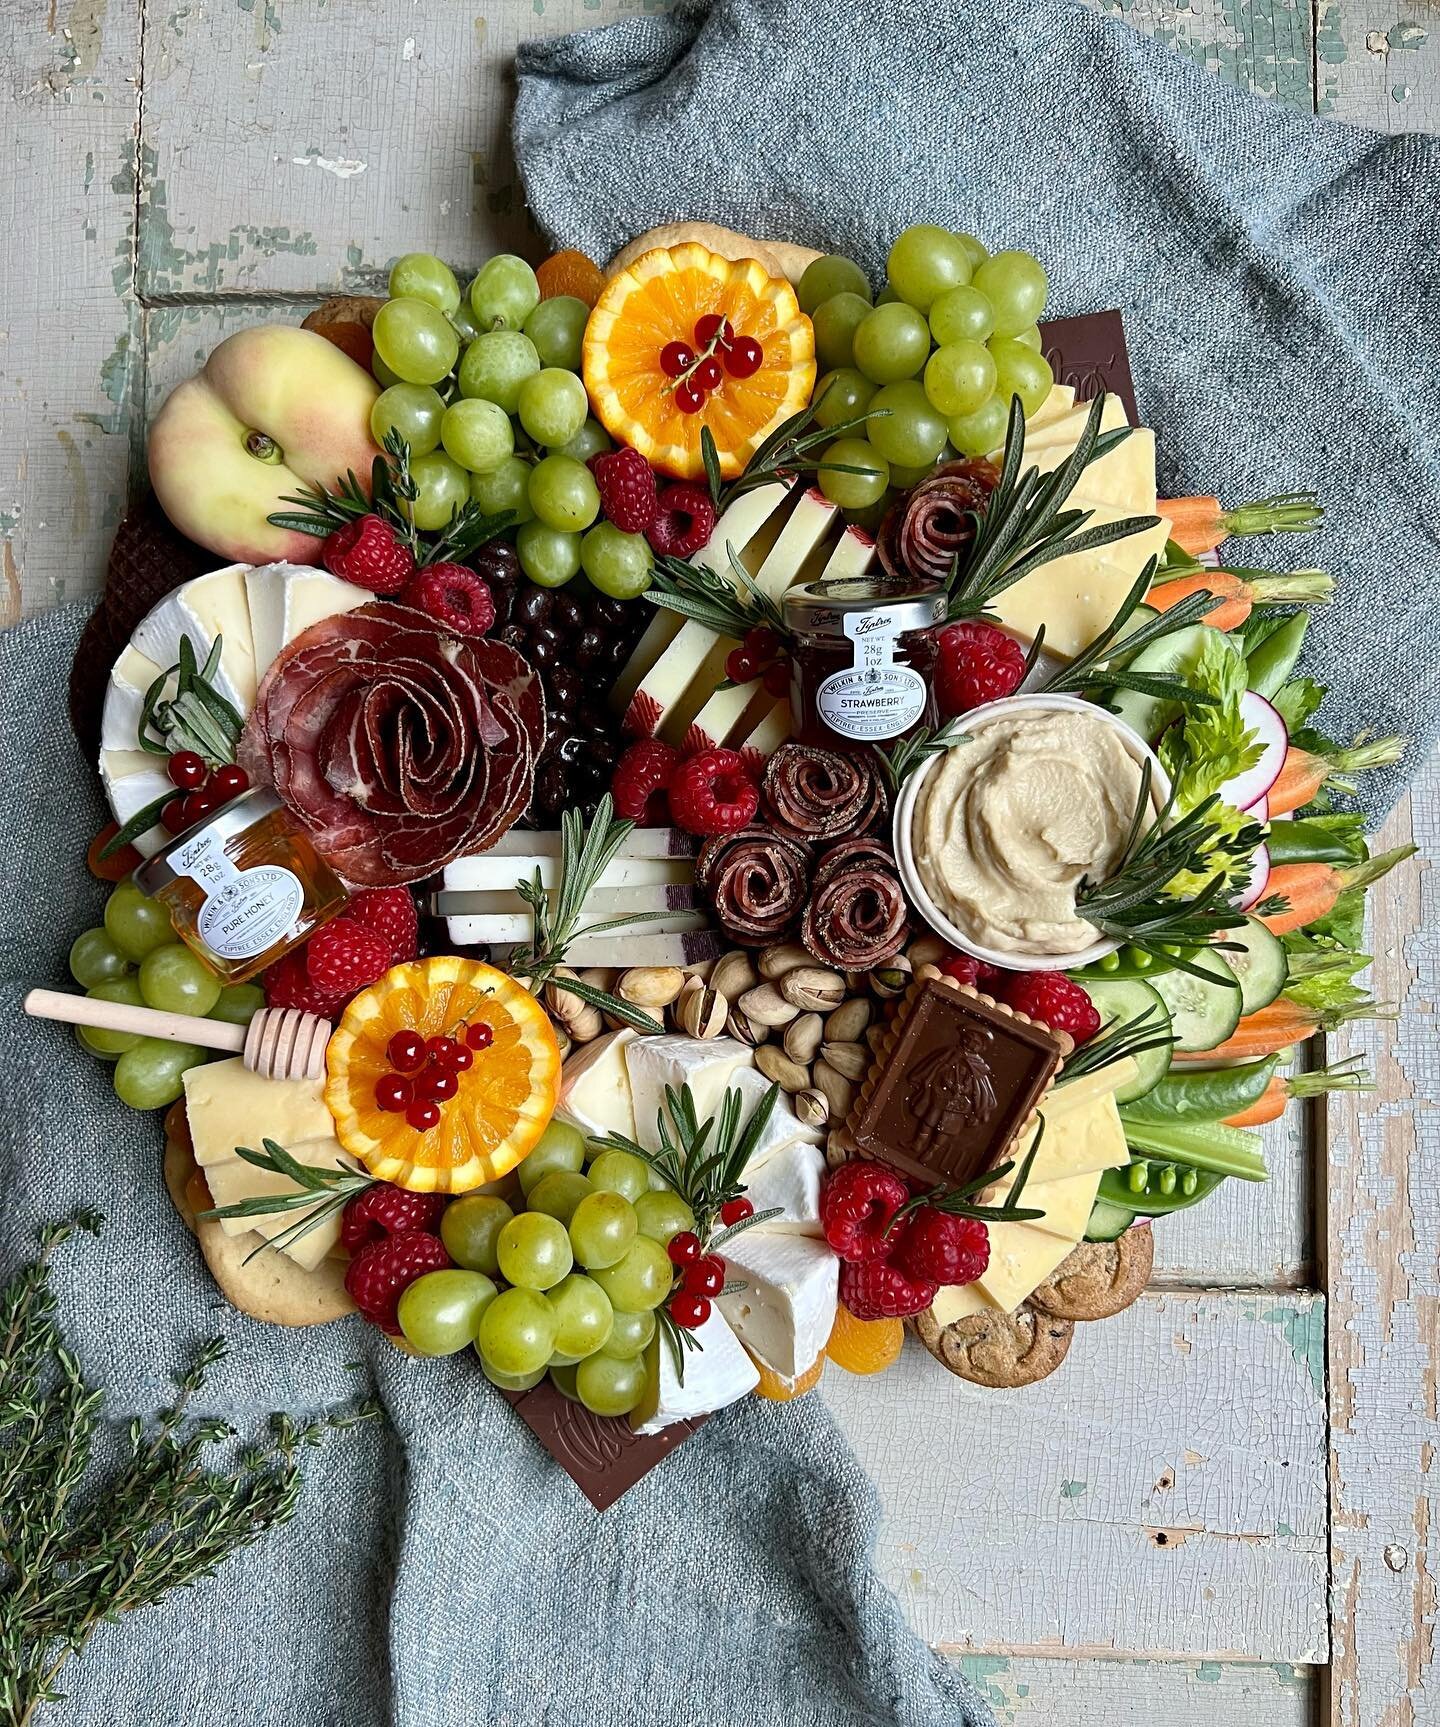 Can&rsquo;t decide between Classic Cheese &amp; Charcuterie and Crudit&eacute;? No worries. At @madebymerryny we got you covered 😊

Order up your A Little Bit of this A Little Bit of That Board 🧀 🍇 🥕 🥒 🫐 🍓 featuring gourmet cheese &amp; charcu